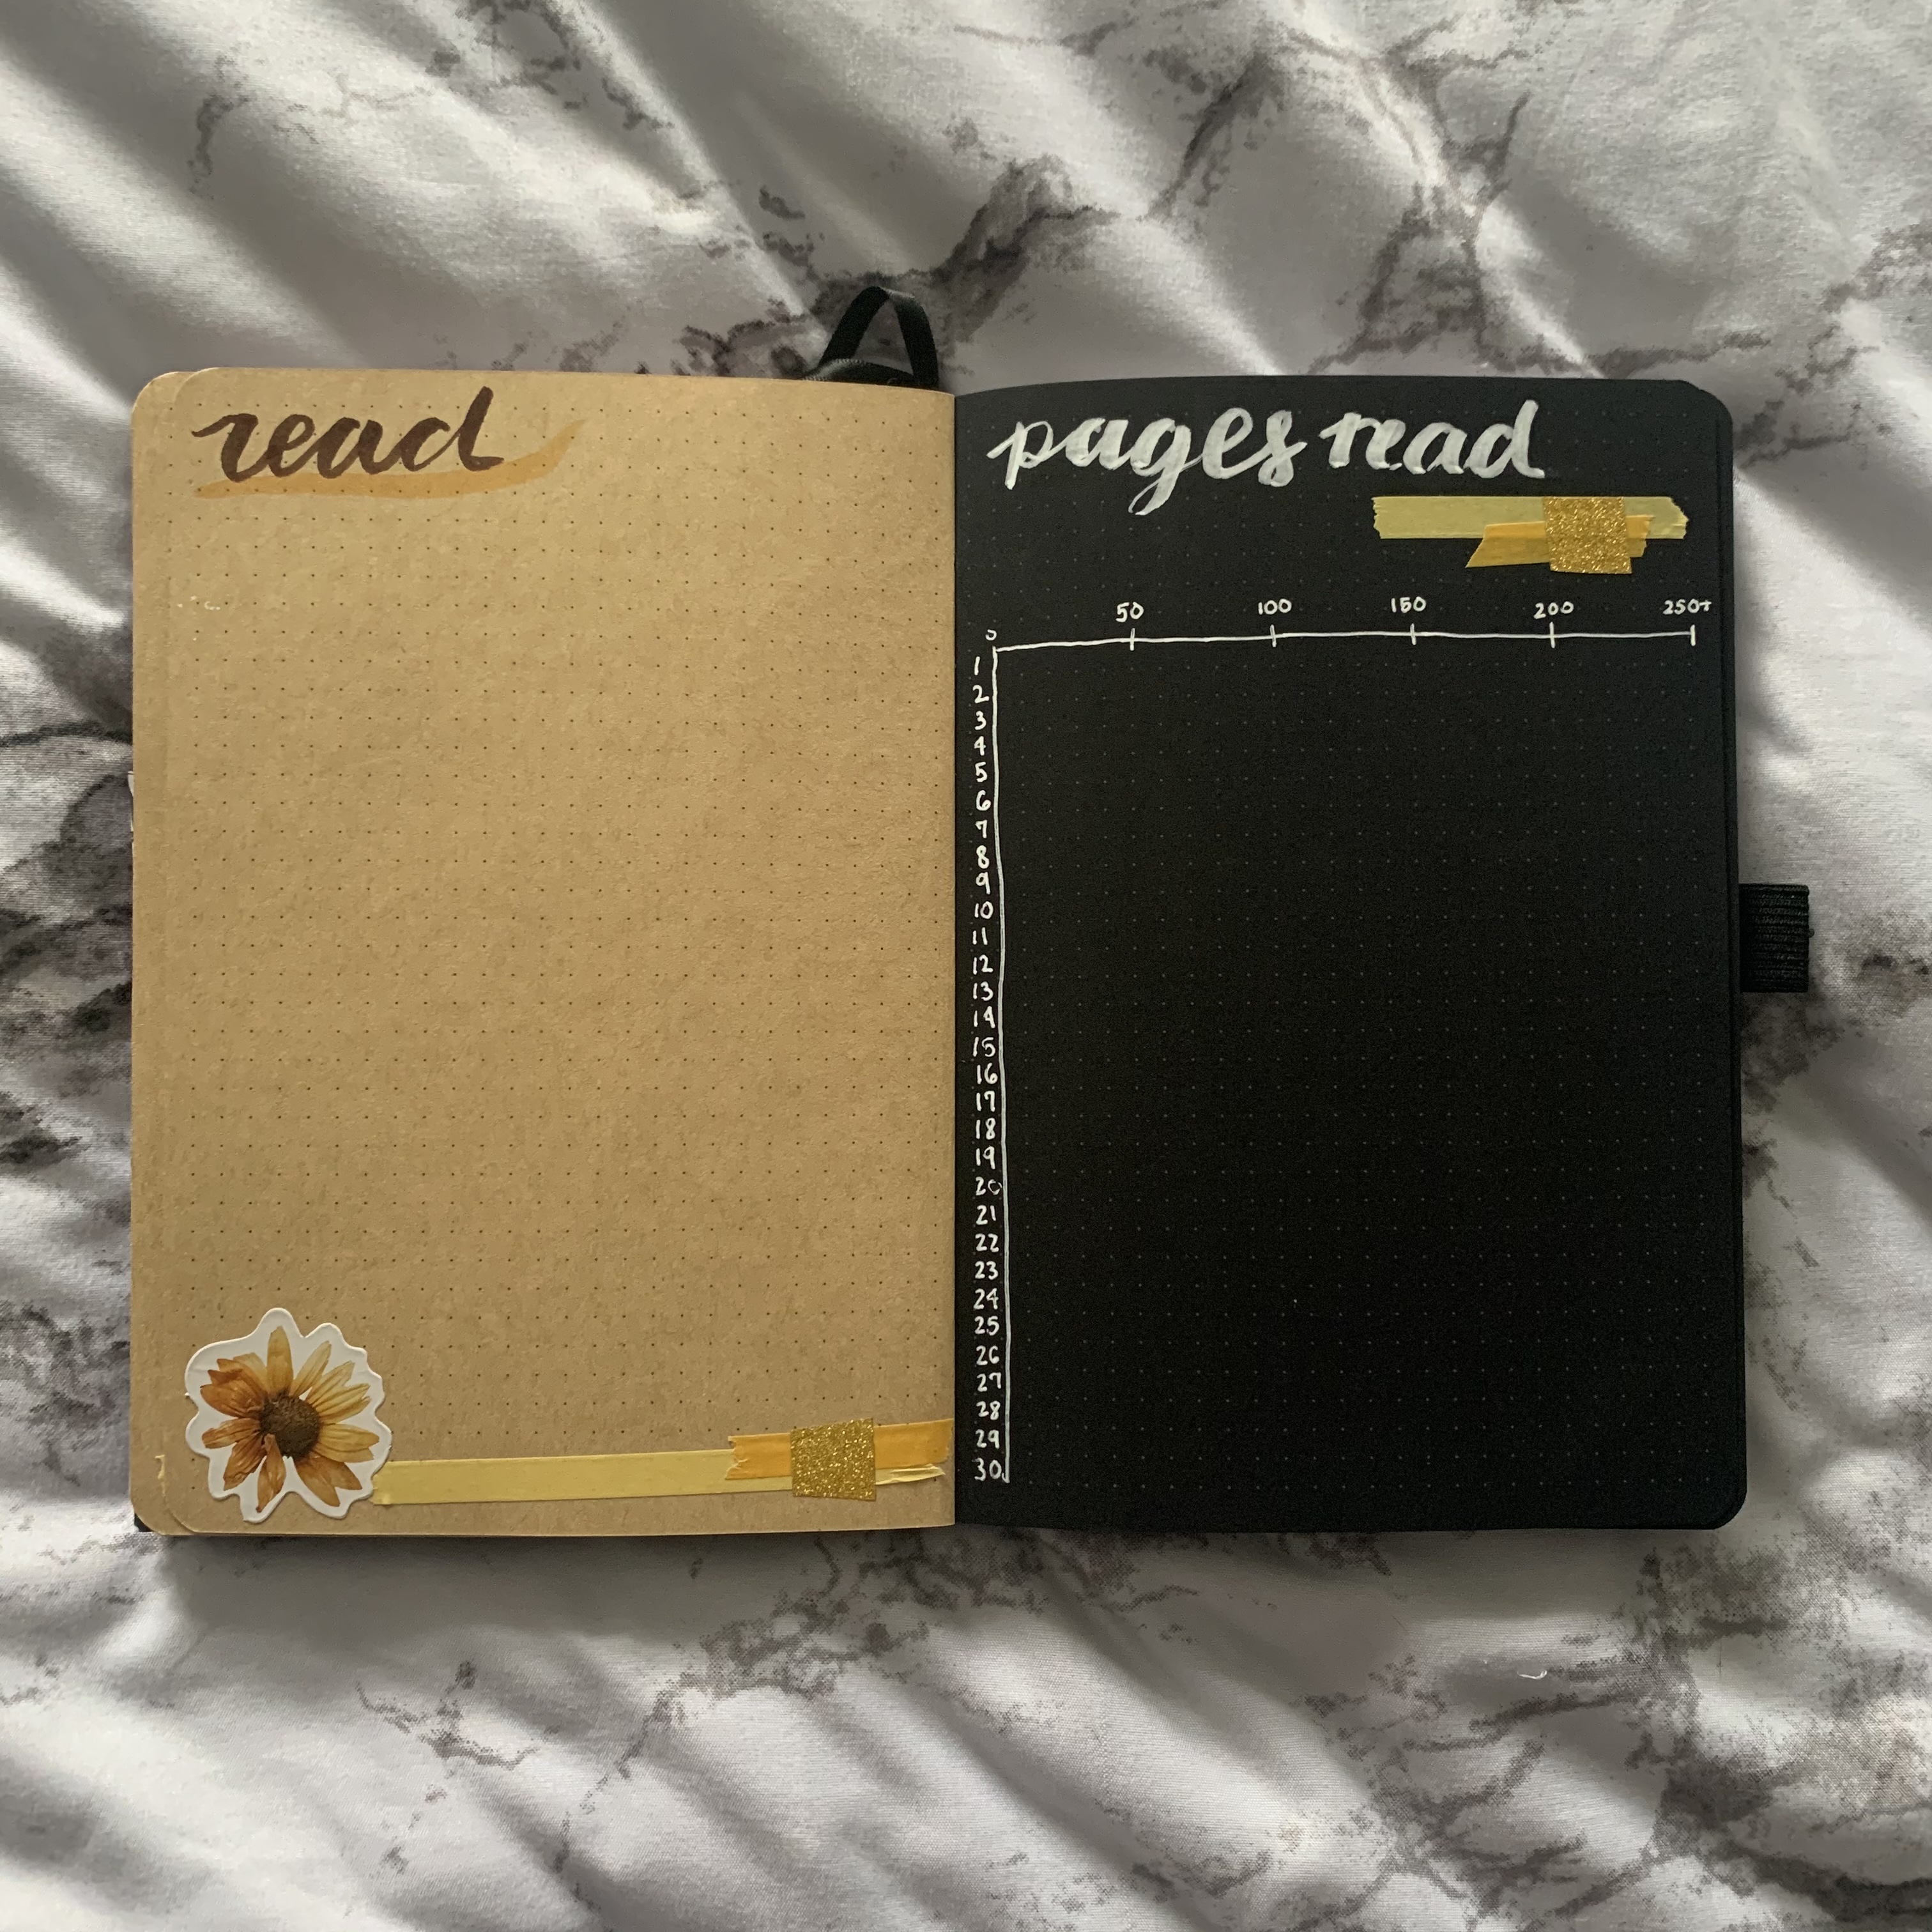 June 2021 Bullet Journal - Read and Pages Read